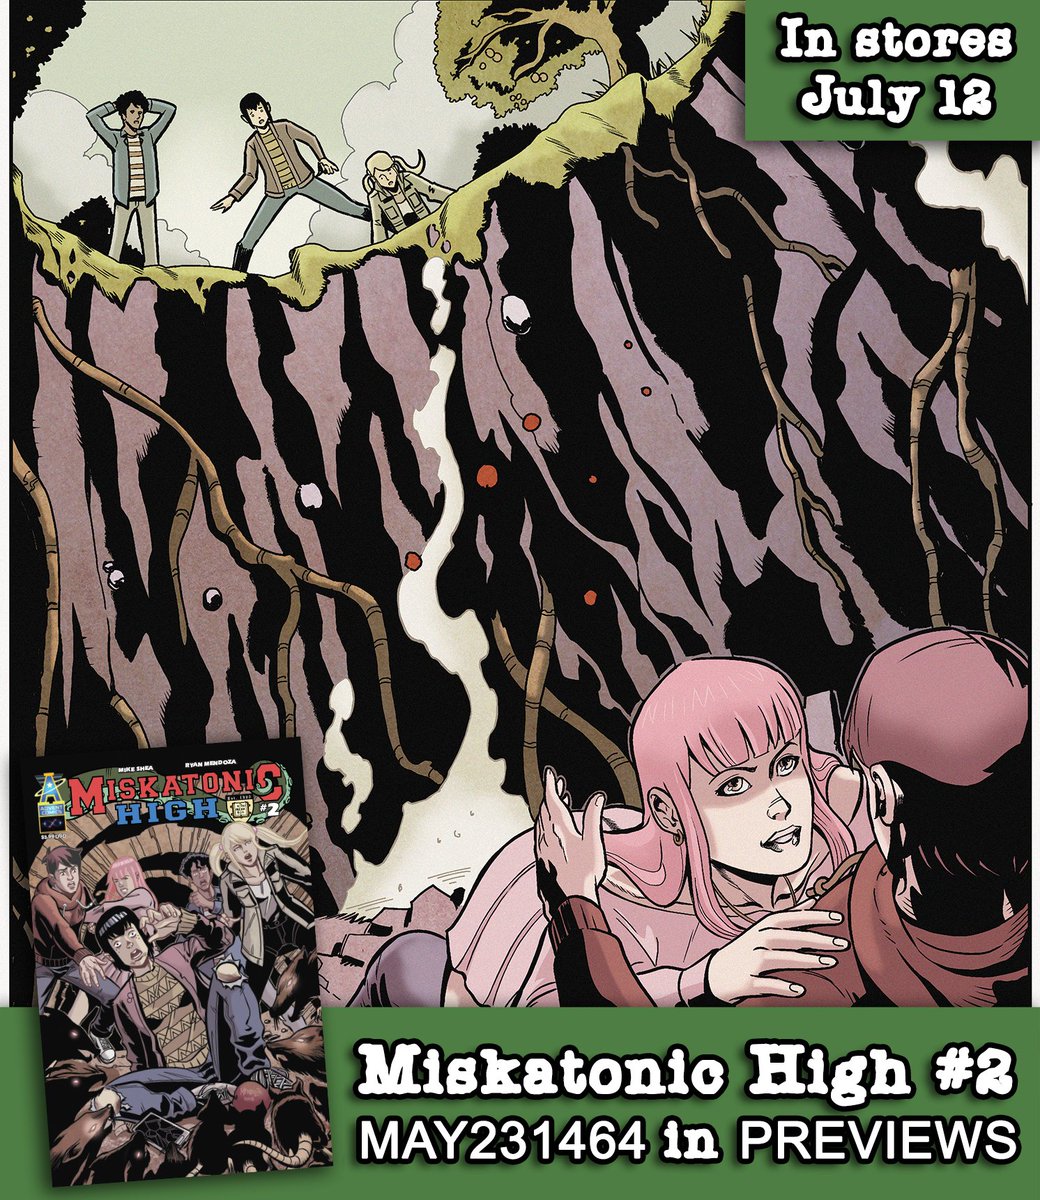 In Miskatonic High, there's so much going on beneath the surface... and it generally ends up bad for these teens. Ask your LCS for MAY231464 from Previewsworld or go to previewsworld.com/Catalog/MAY231…

#callofcthulhu #comic #comicbooks #cthulhu #drawing #horror #hplovecraft #lovecraft